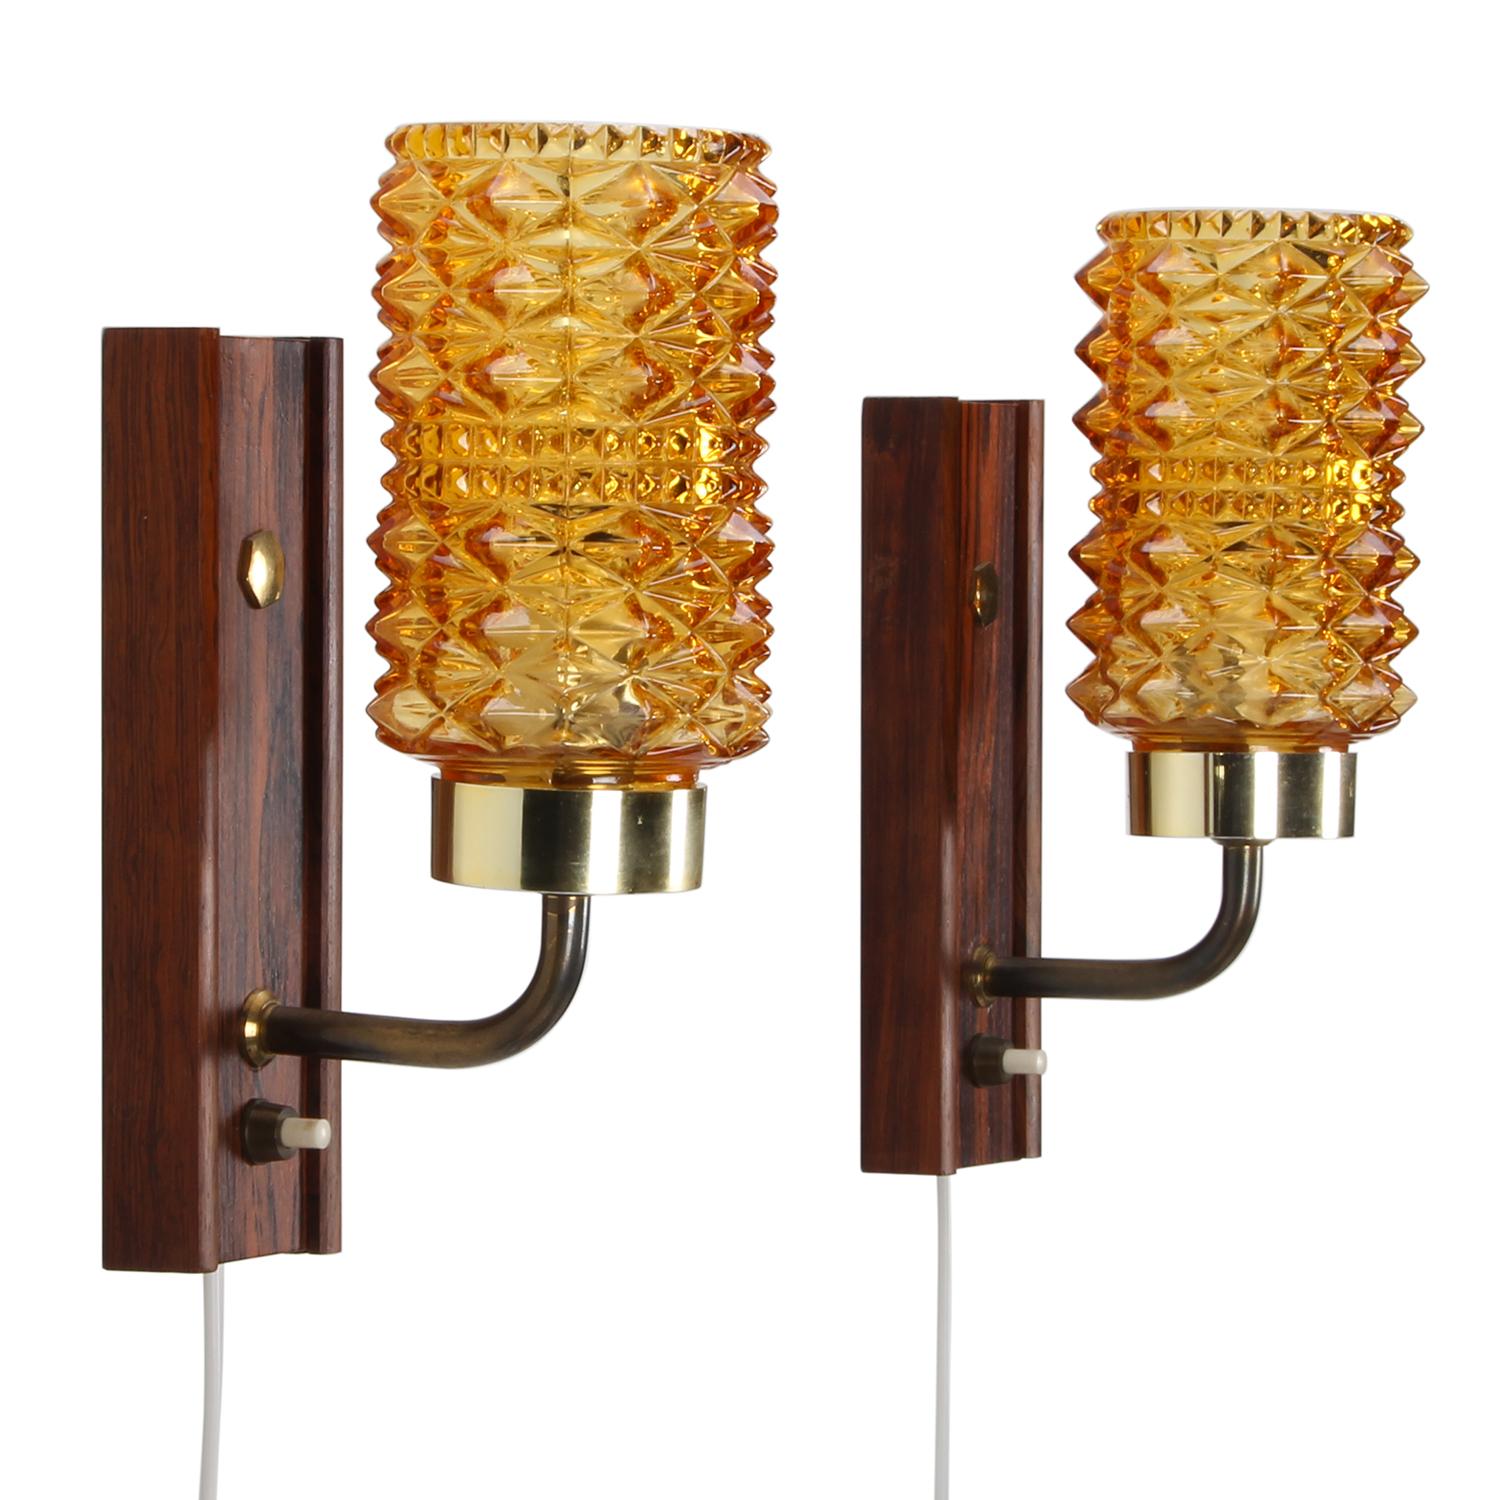 Amber & Rosewood Wall Lamps Pair, 1950s Danish Vintage Wall Lights